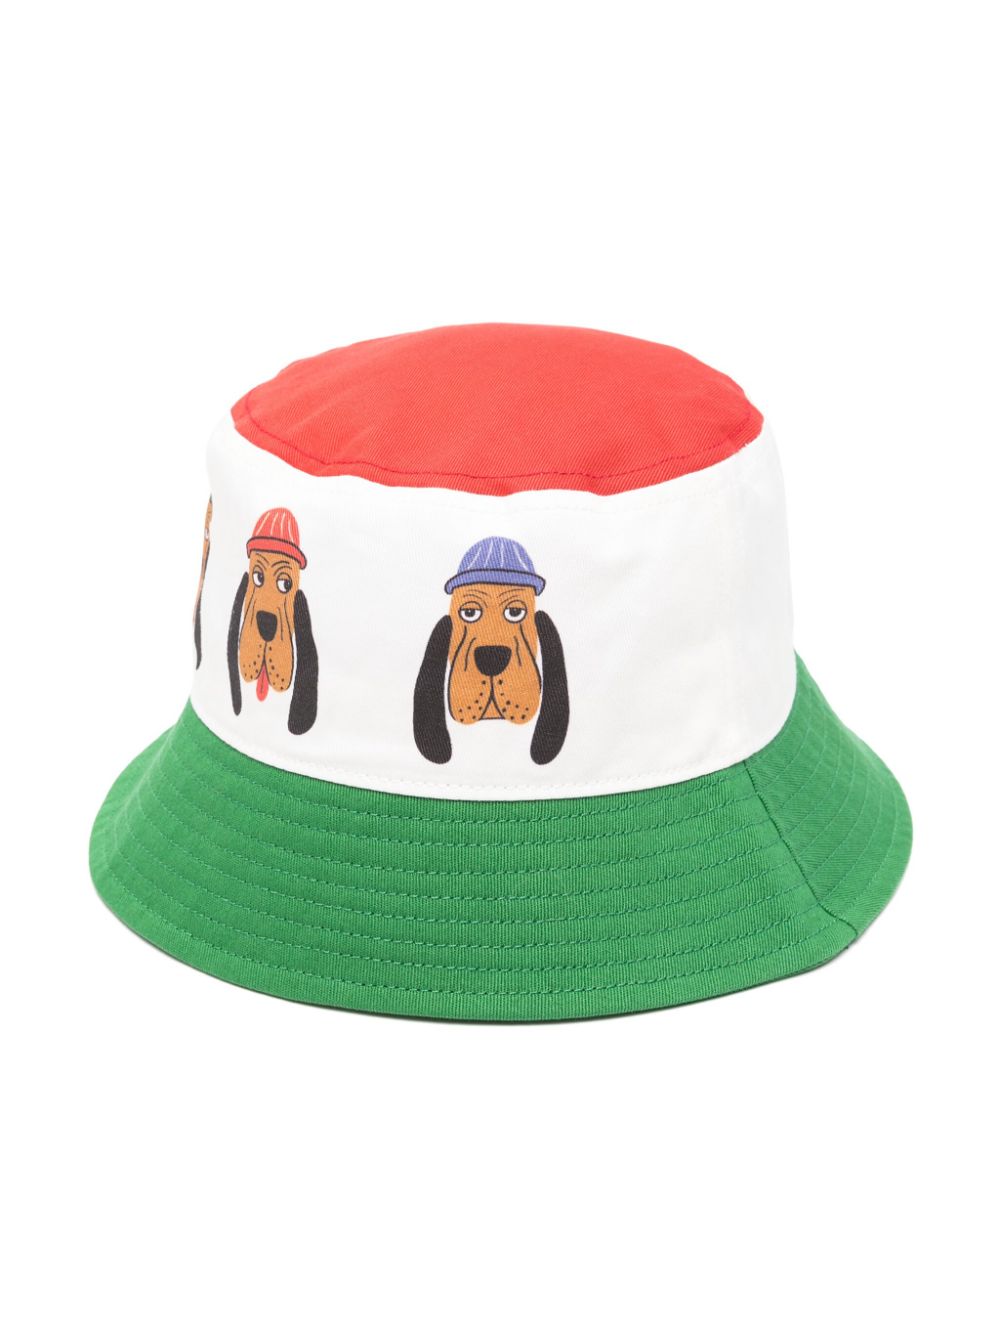 Bucket hat with print